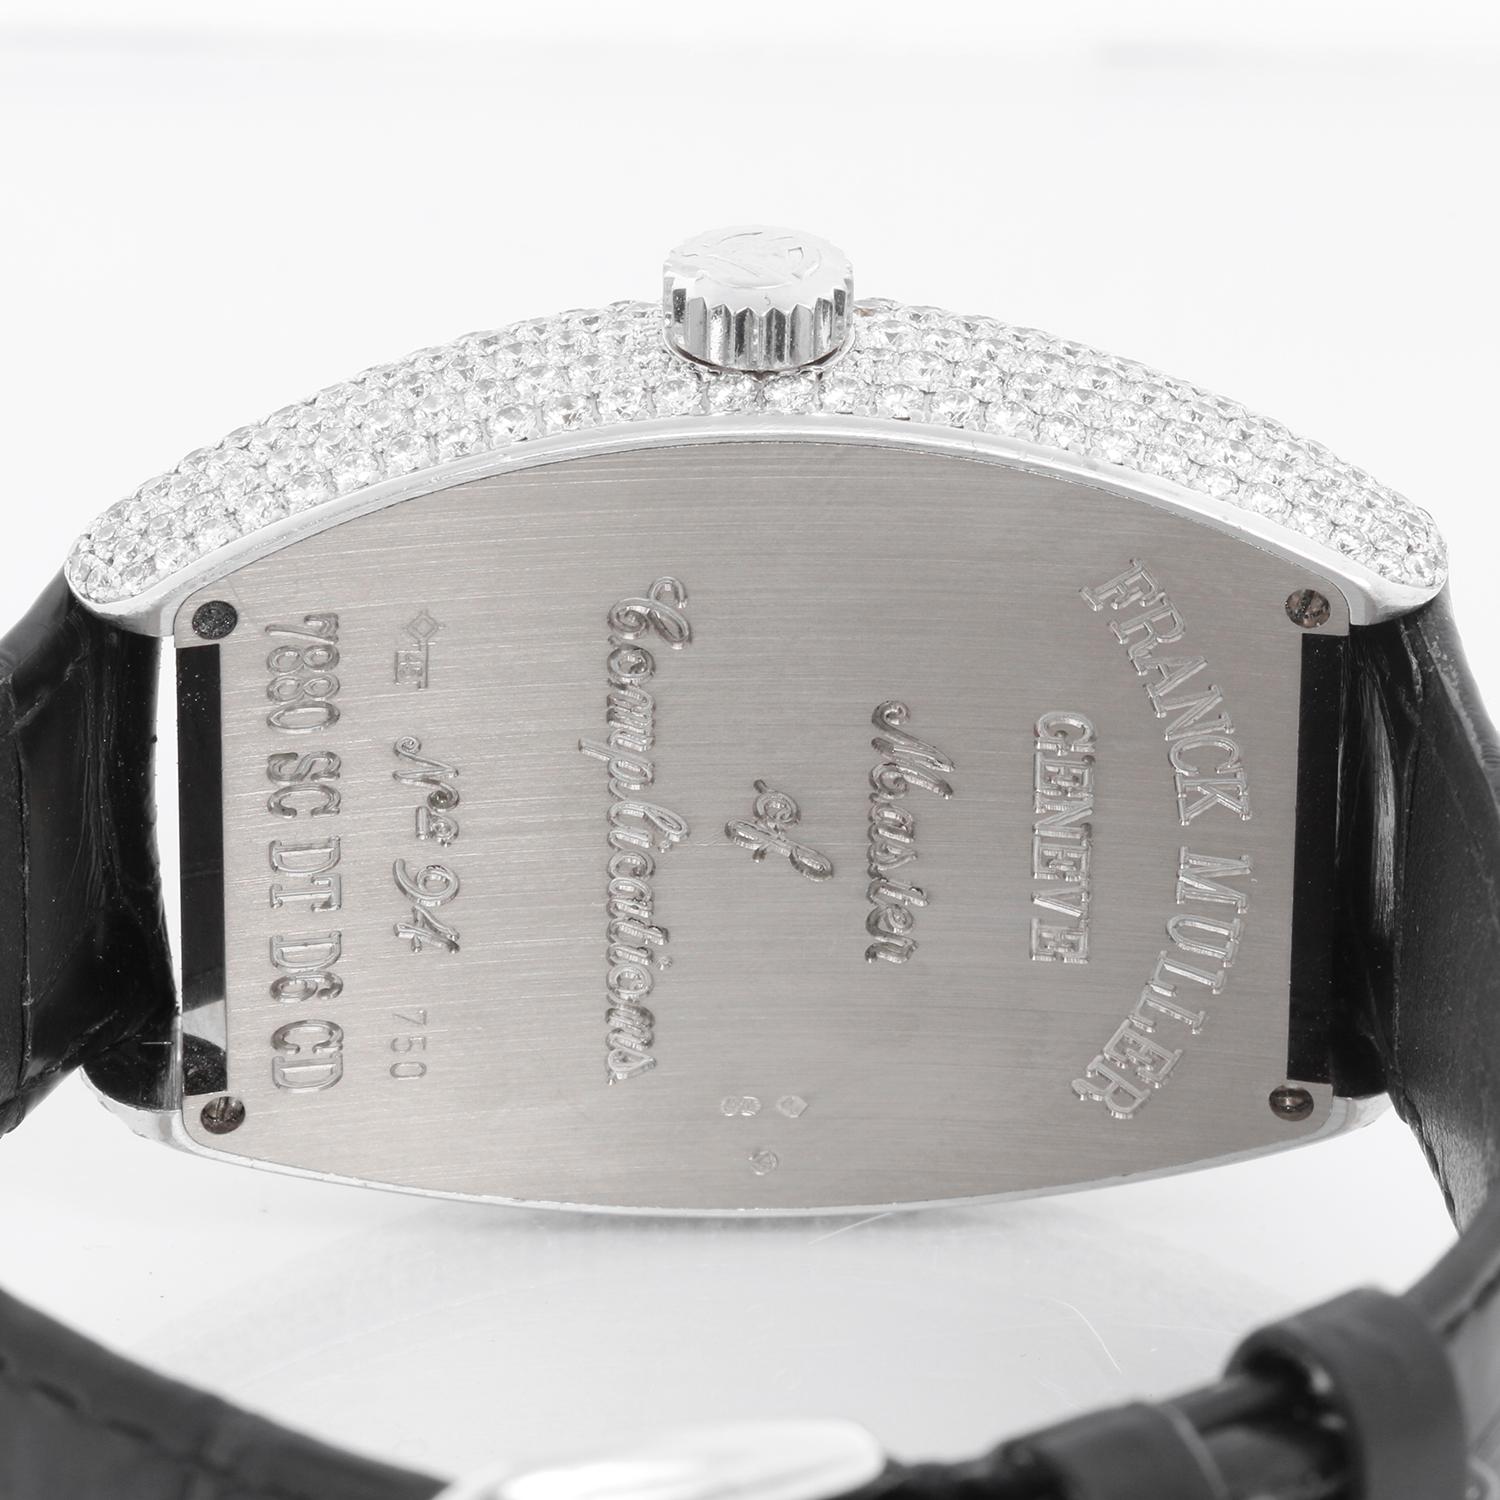 Franck Muller Casablanca 18K White Gold Diamond Watch 7880 SC DT D6 CD In Excellent Condition For Sale In Dallas, TX